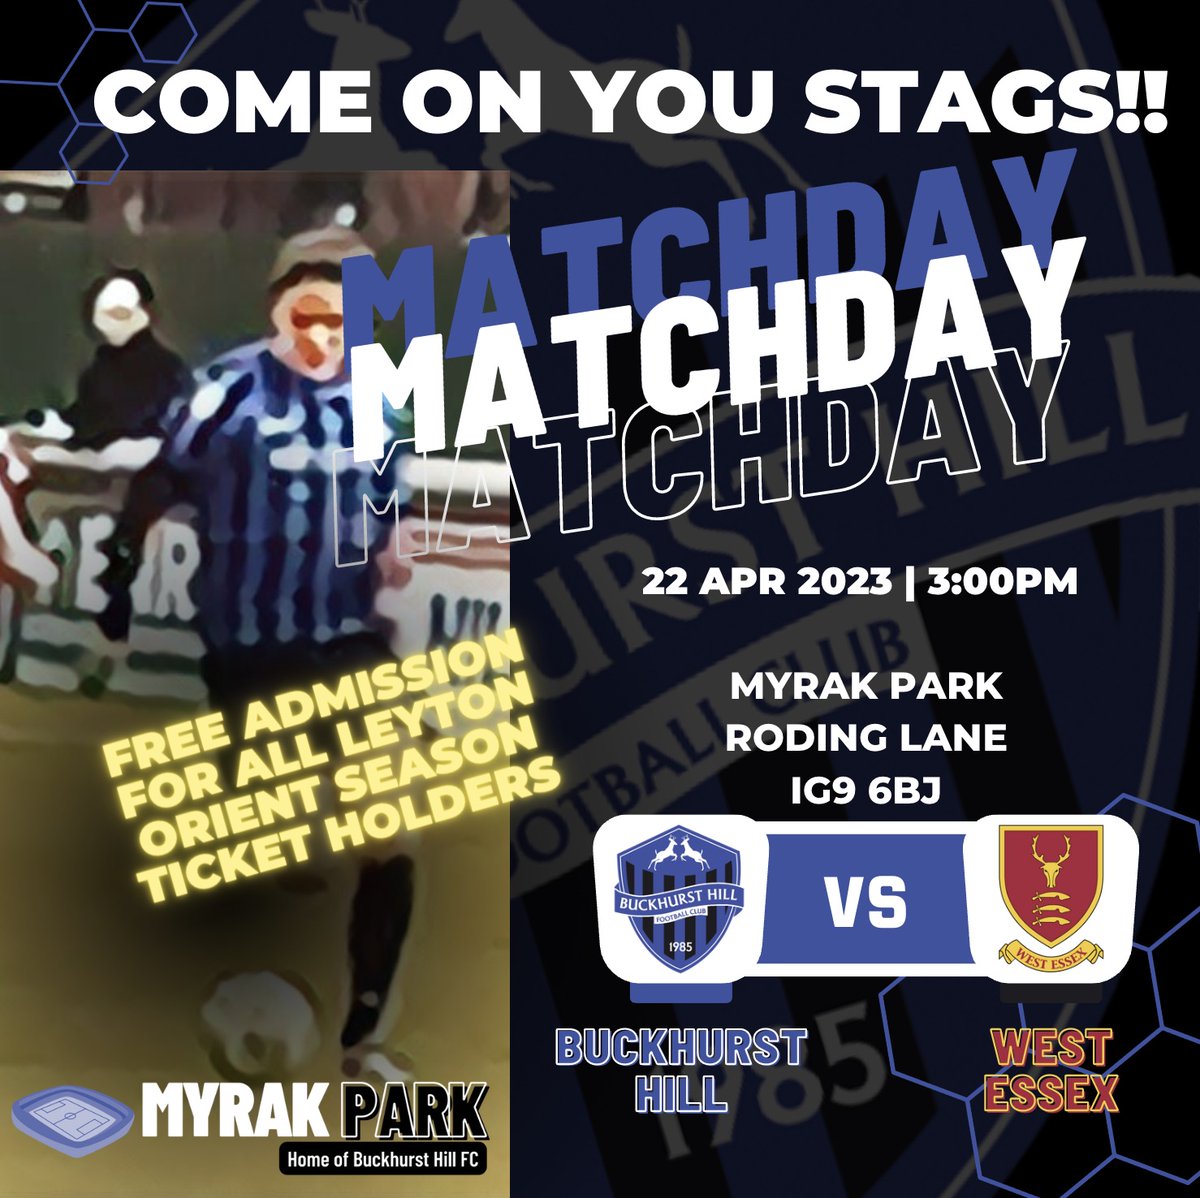 IT'S MATCHDAY!!
Home sweet home! 🏠 The Stags are back and ready to take on the pitch 💪 Let's fill up the ground and show our support for the boys! 🔊 
Get ready for a day filled with football, passion, and community! 
#COYStags #BuckhurstHill